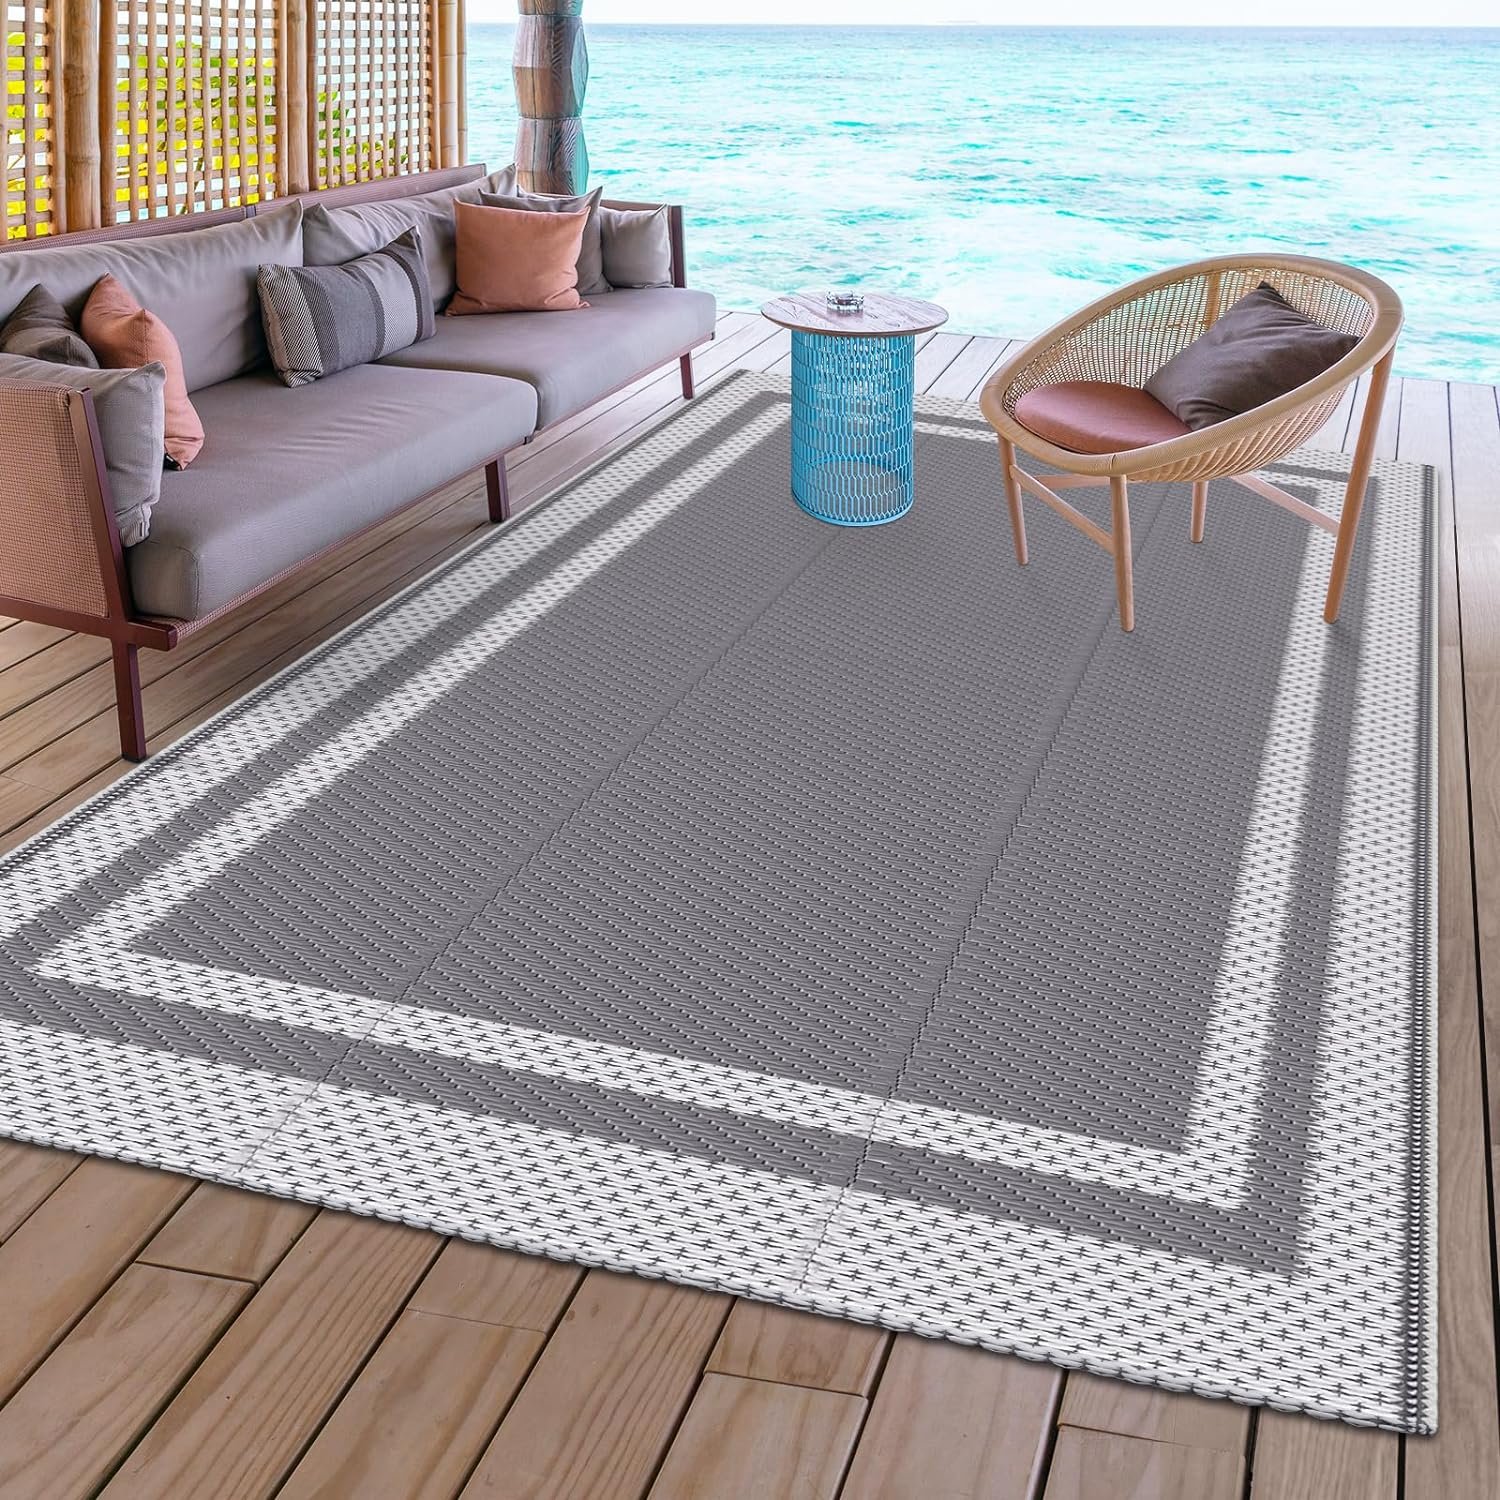 HappyTrends Outdoor Rug Reversible Portable Plastic Straw Camping Rugs for Outside RV,Large Waterproof Outdoor Area Rugs for Patio,Deck,Porch,Balcony(5x 8,WhiteGray)